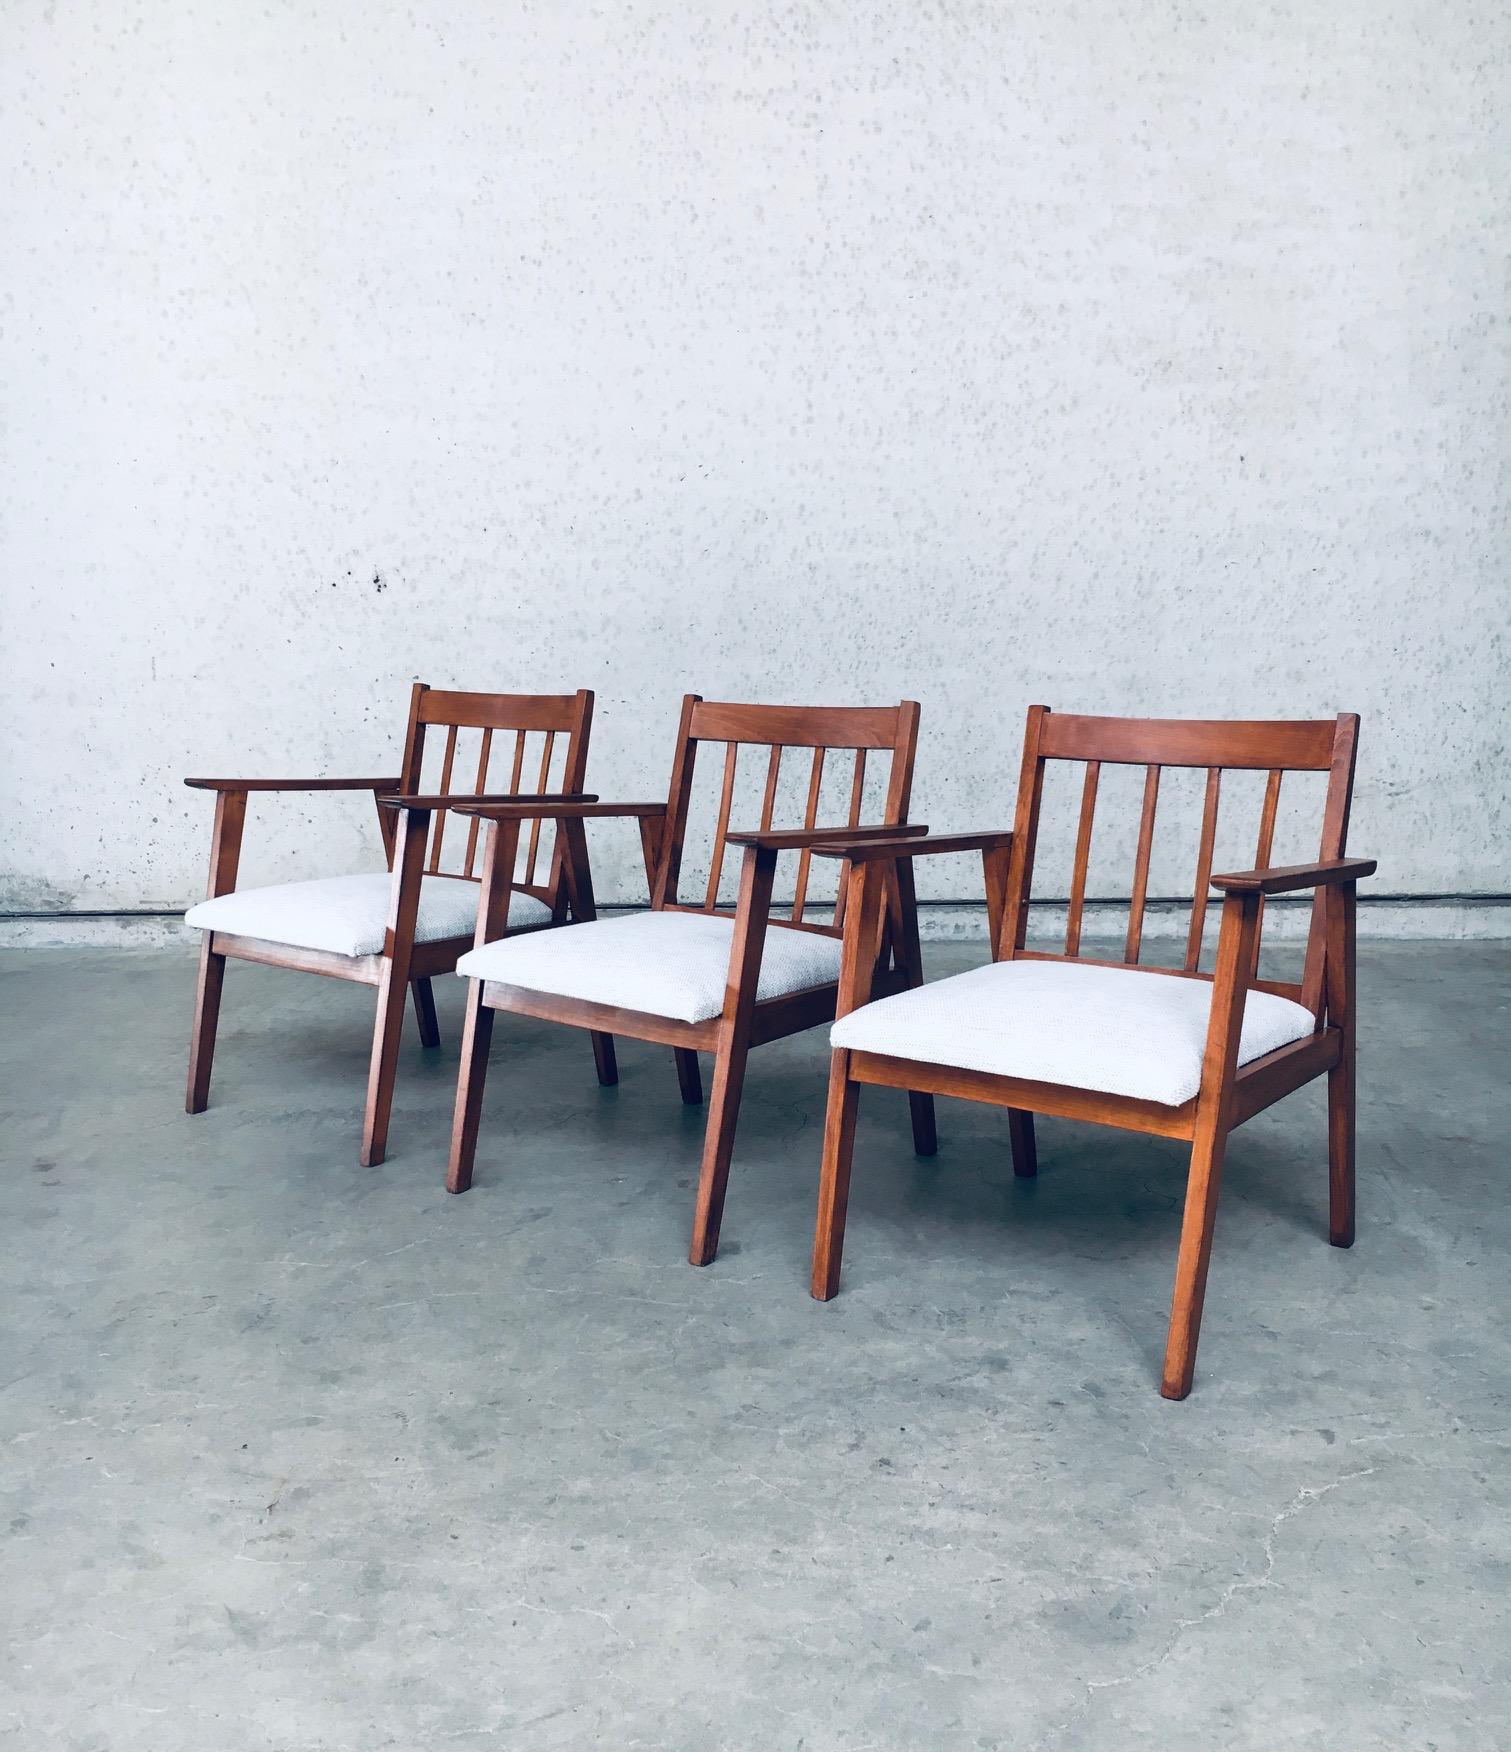 Vintage Mid-Century Modern Dutch Design armchair set, made in the Netherlands 1950's. Beech wooden frame, stained in teak color with wool fabric covered seat. The 3 side chairs have been restained with new reupholstered seats on the all original